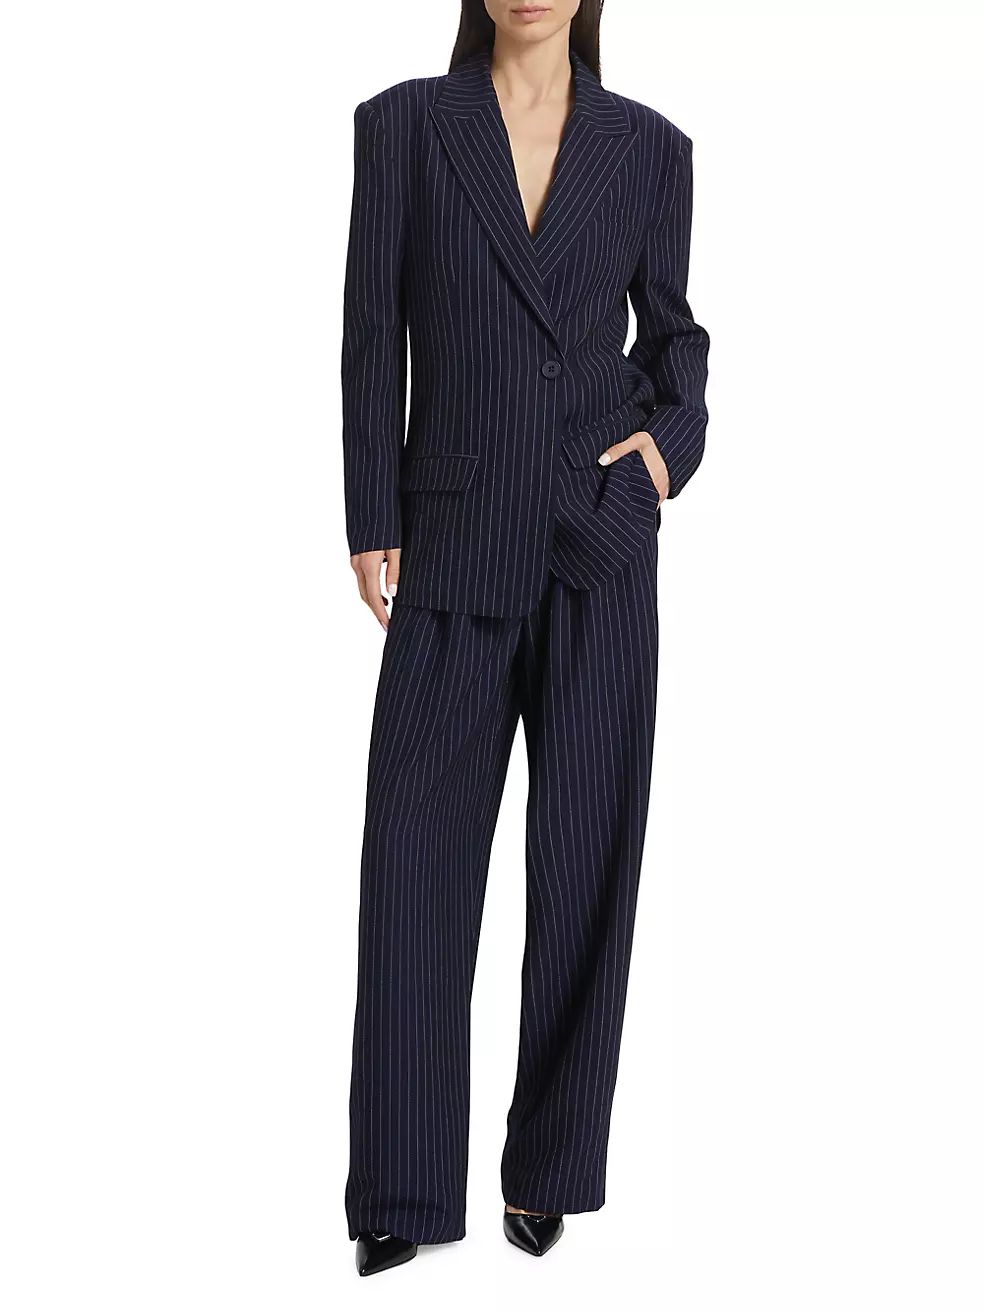 Margeaux Pinstripe Baggy Belted Pants | Saks Fifth Avenue